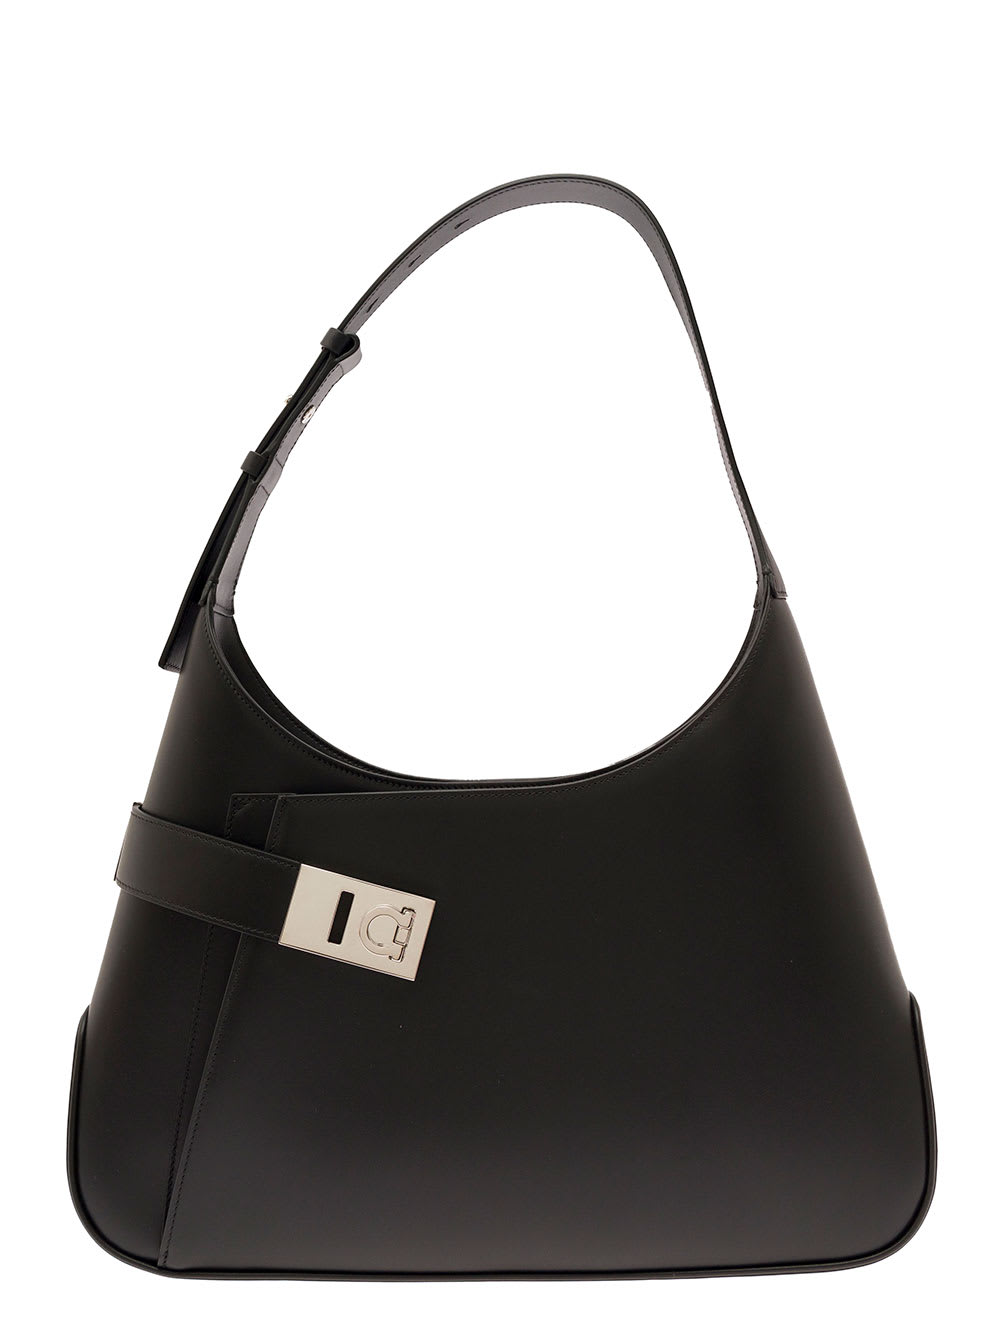 Black Hobo Shoulder Bag With Asymmetric Pocket And Gancini Buckle In Leather Woman